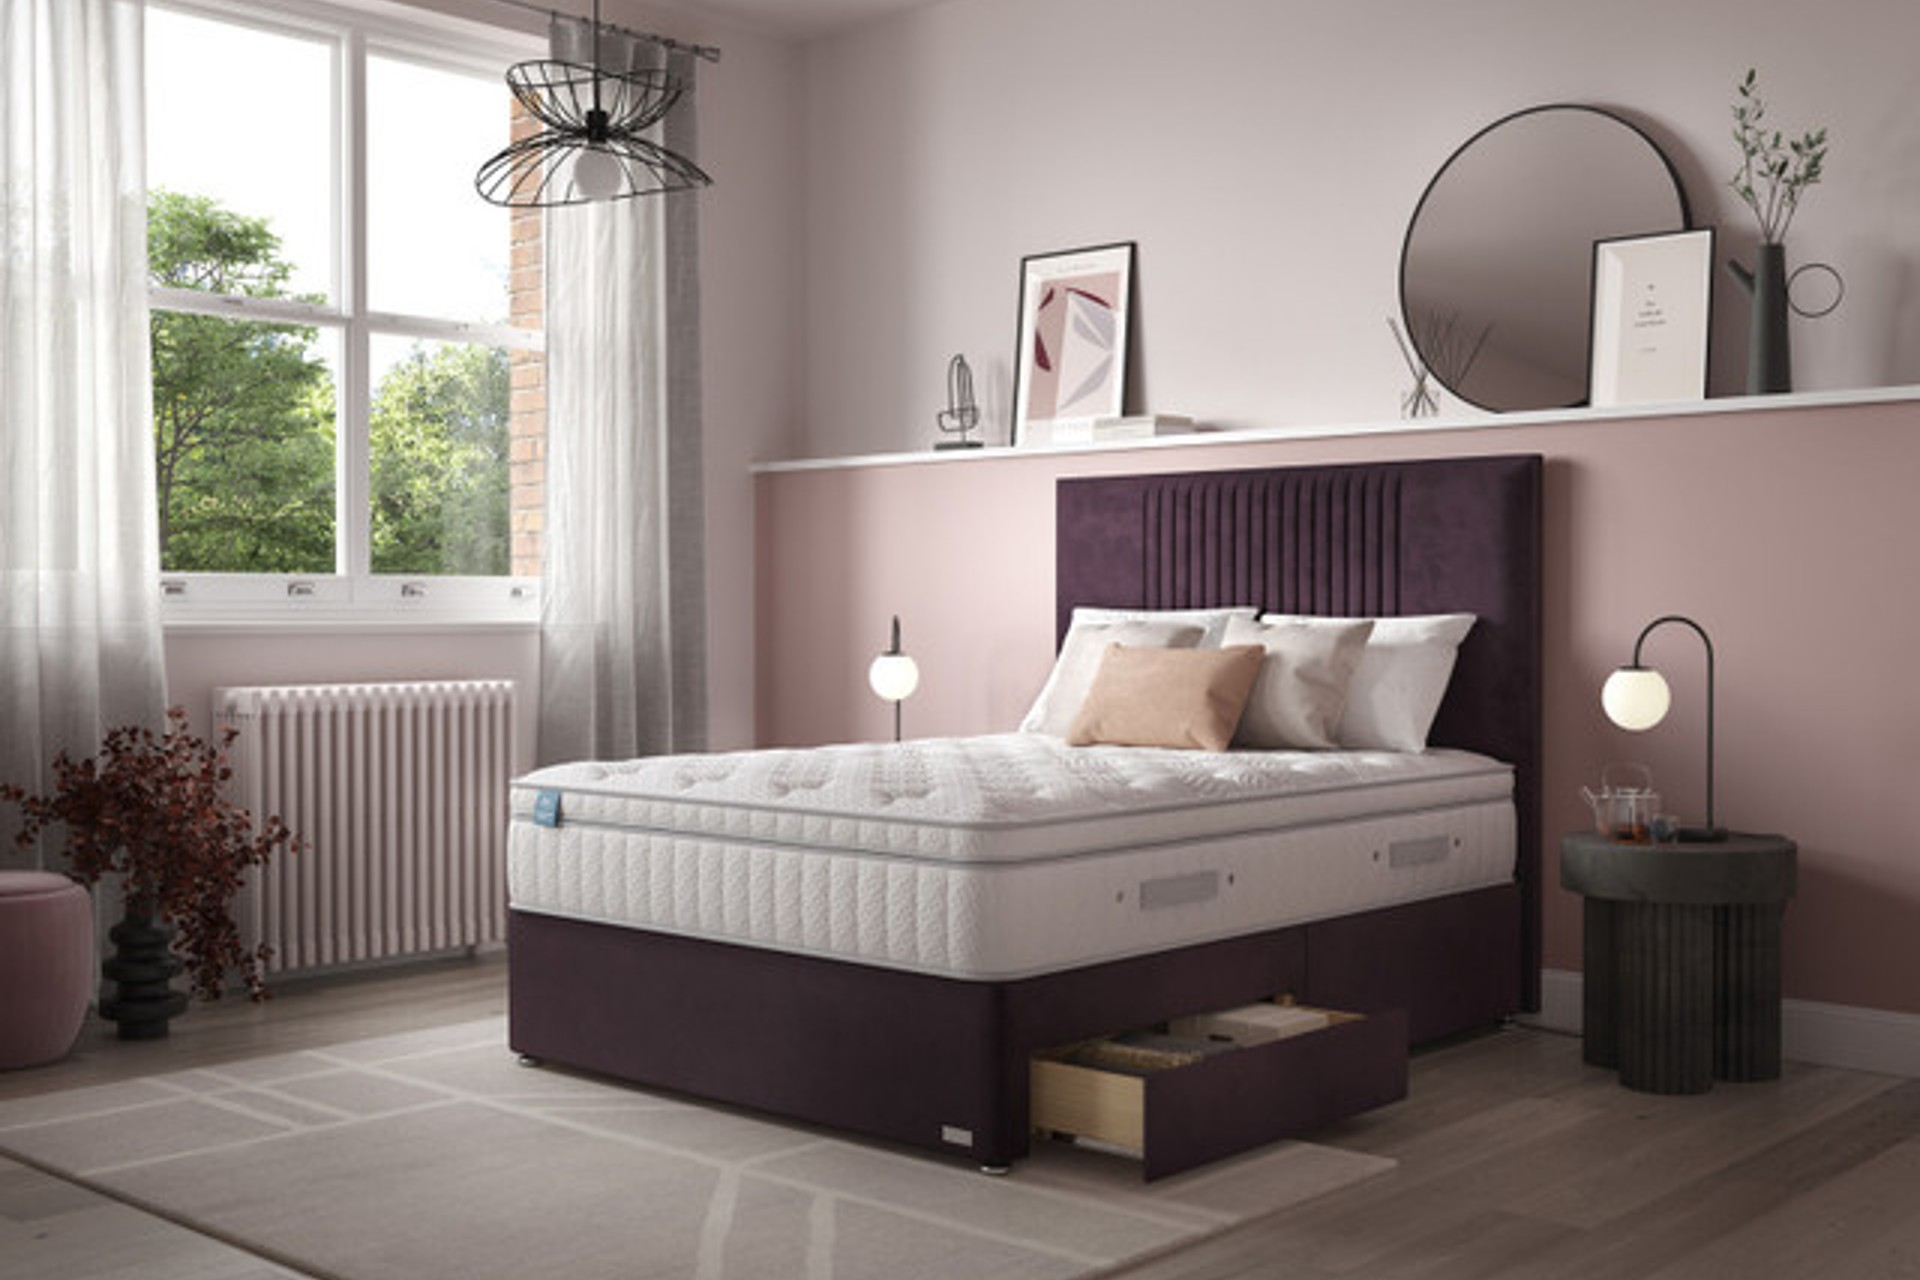 iGel Advance 3000i Plush Top Mattress and Divan Bed Set On Glides in bespoke mulberry purple